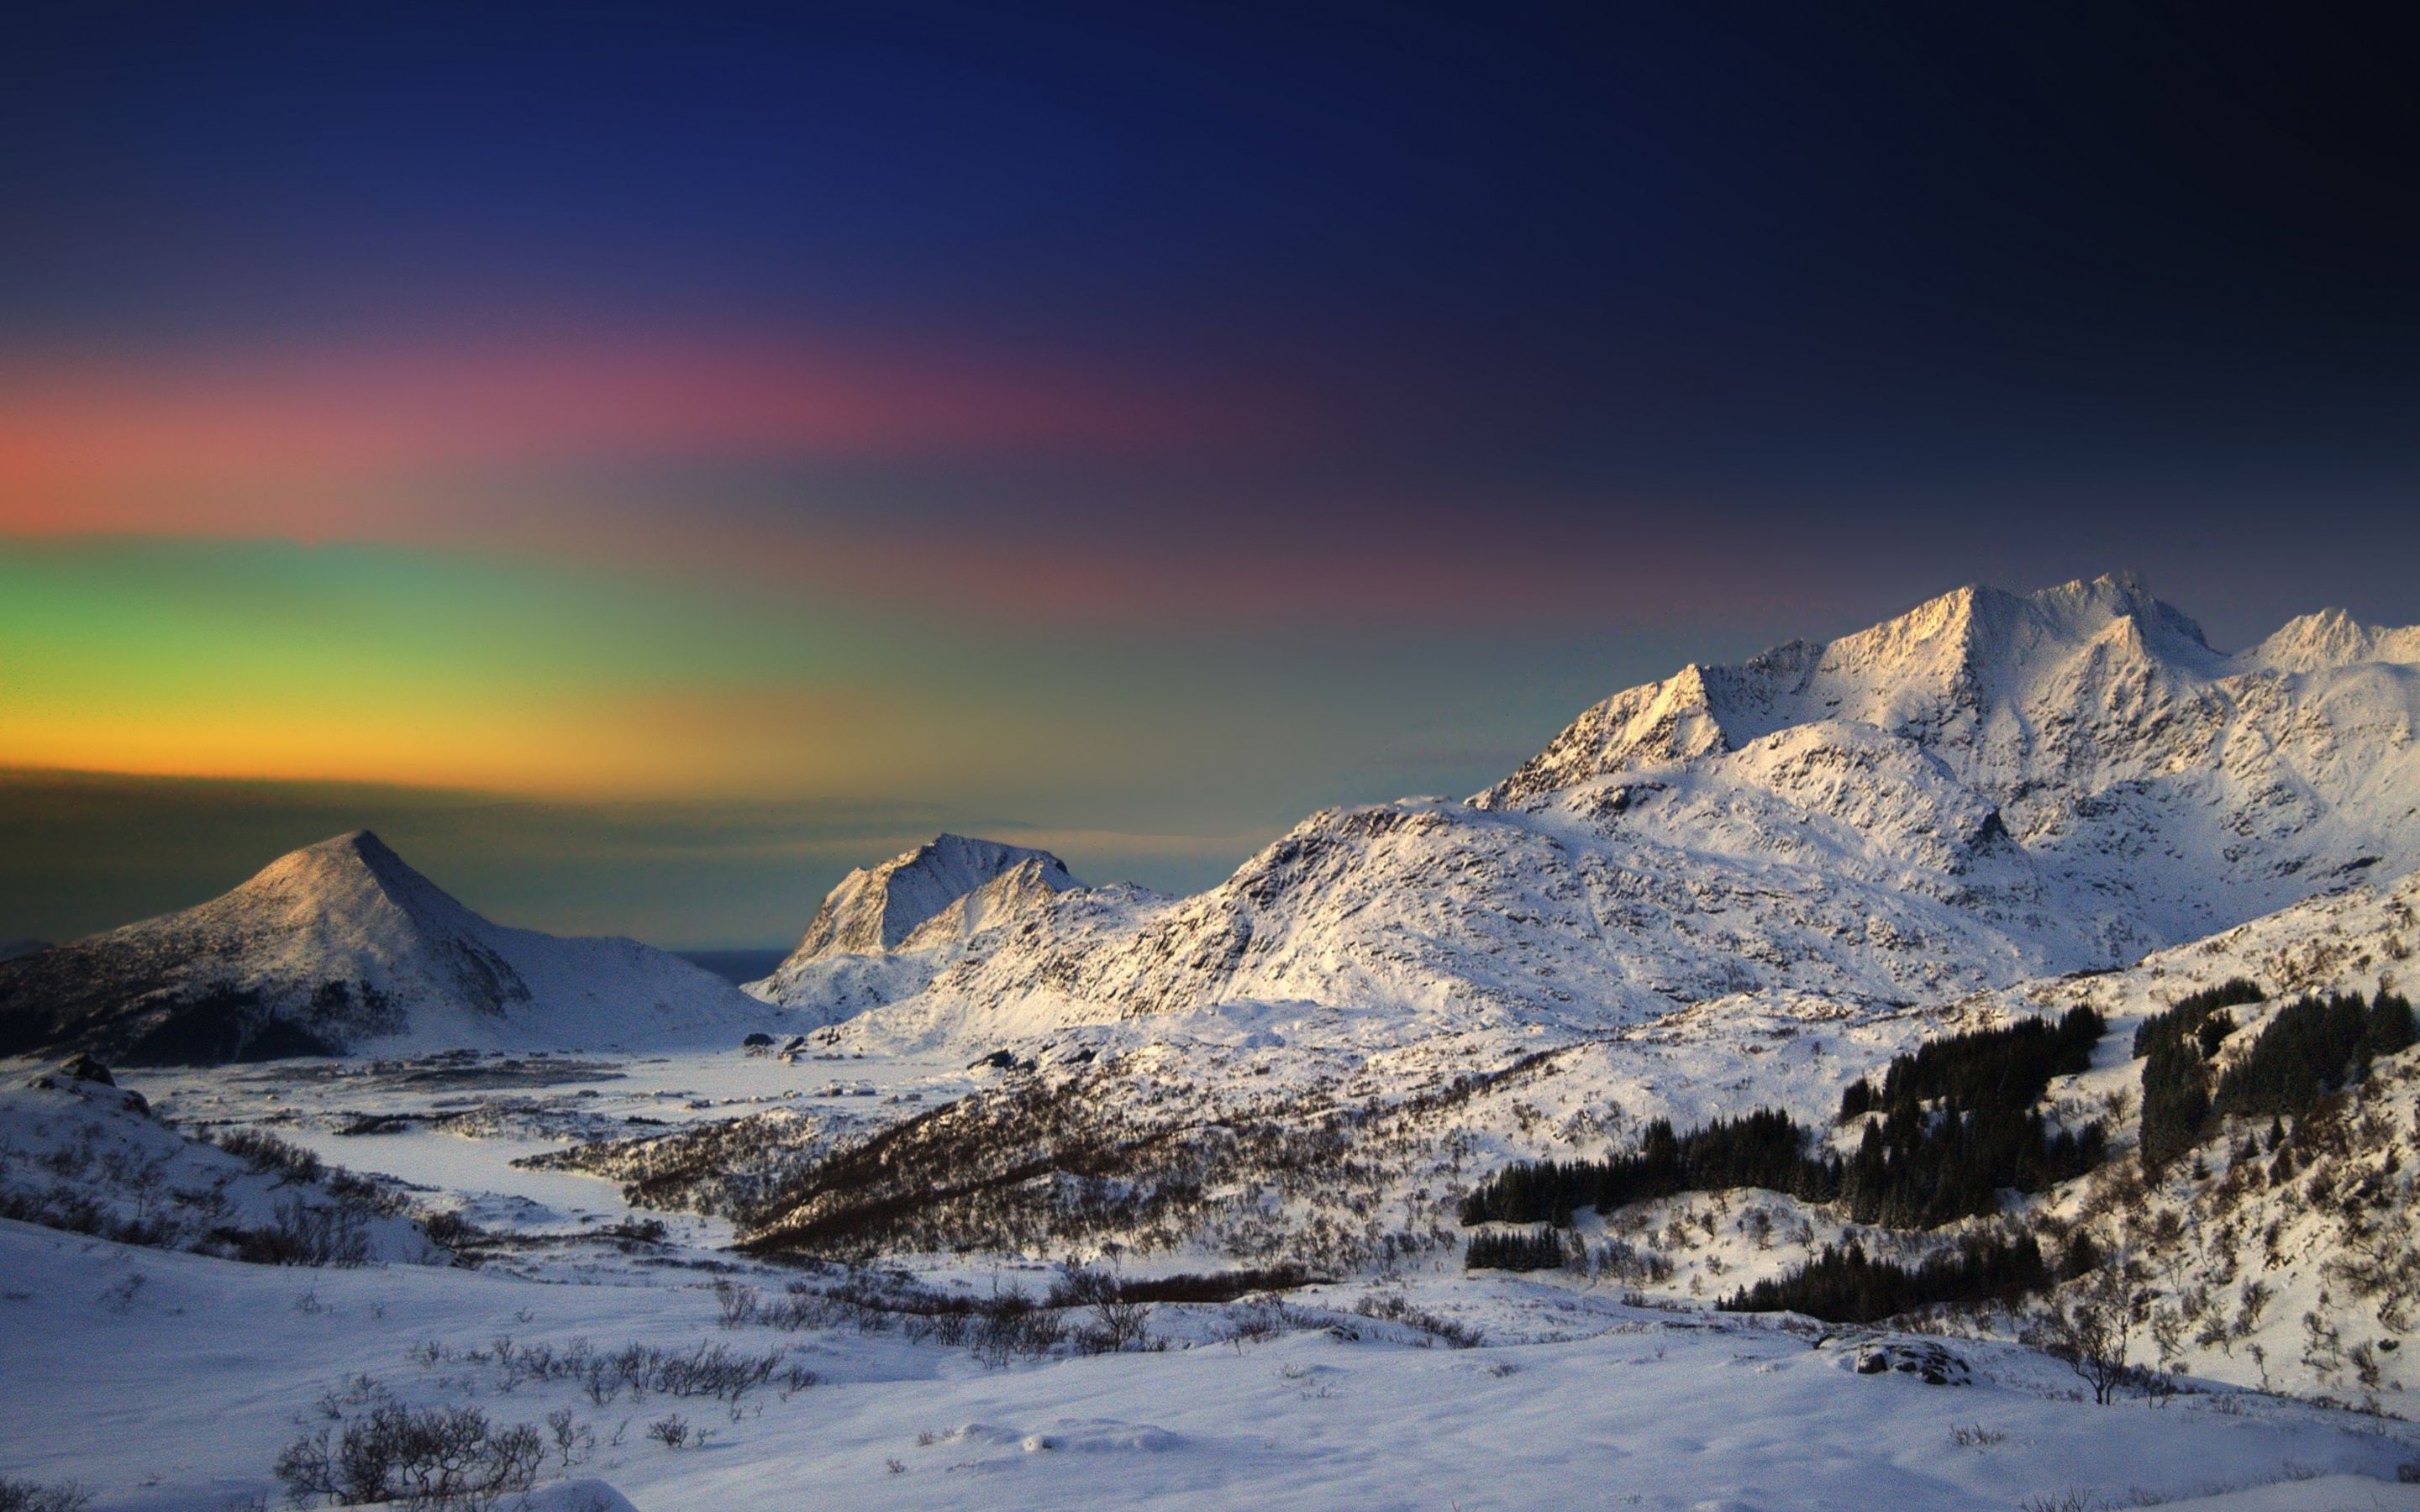 Winter Morning In The Mountains MacBook Air Wallpaper Download